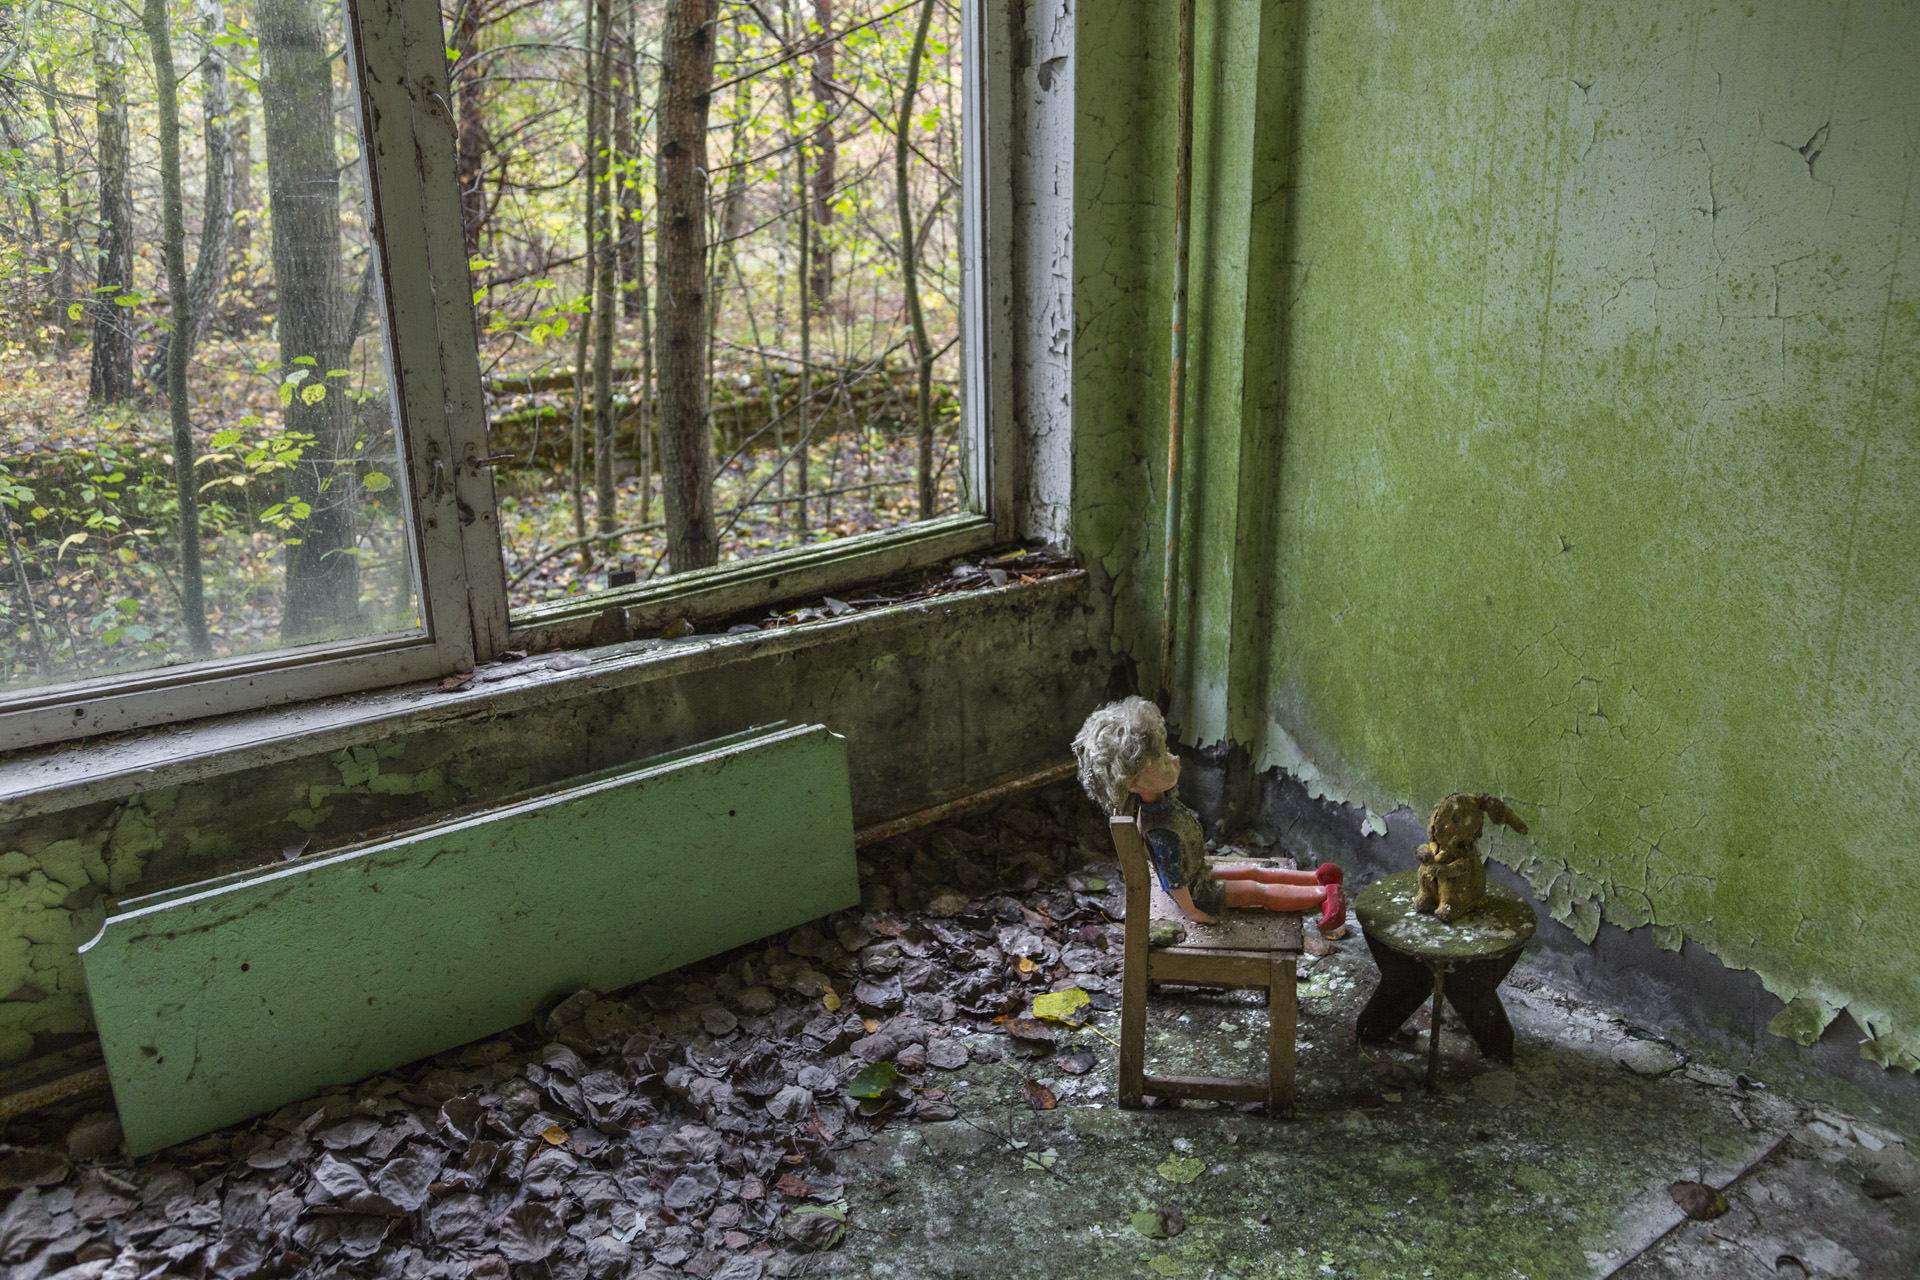  In an abandoned kindergarten children's toys and gas masks create a strange still life. One can suspect that the mix was created intentionally.  Pripyat, Ukraine  